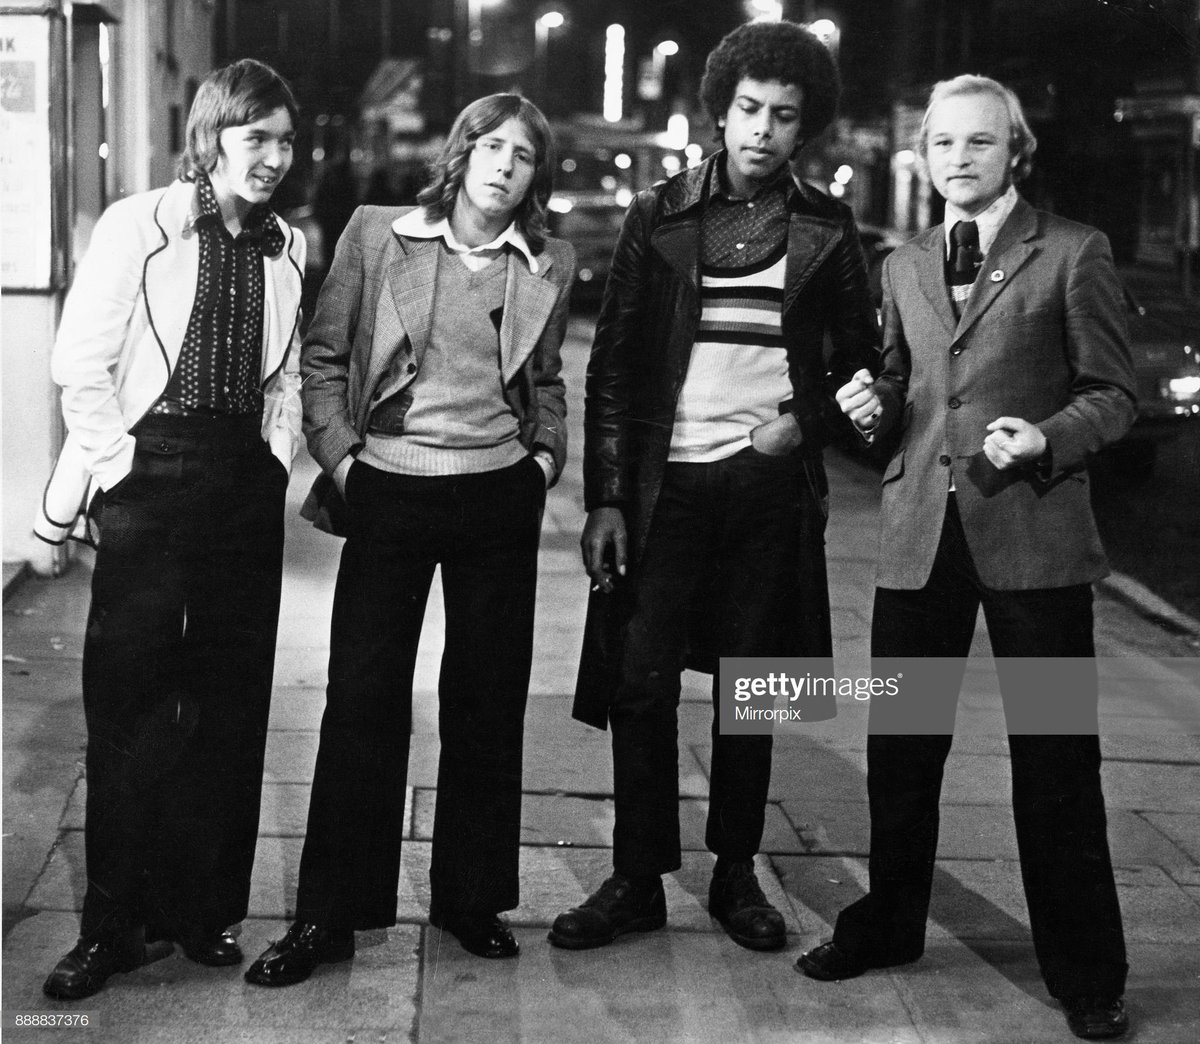 From the Terrace to the Streets..A work in progress..A group of Leeds United fans on a night out following a match in October 1972. Photo by Harold Halborn